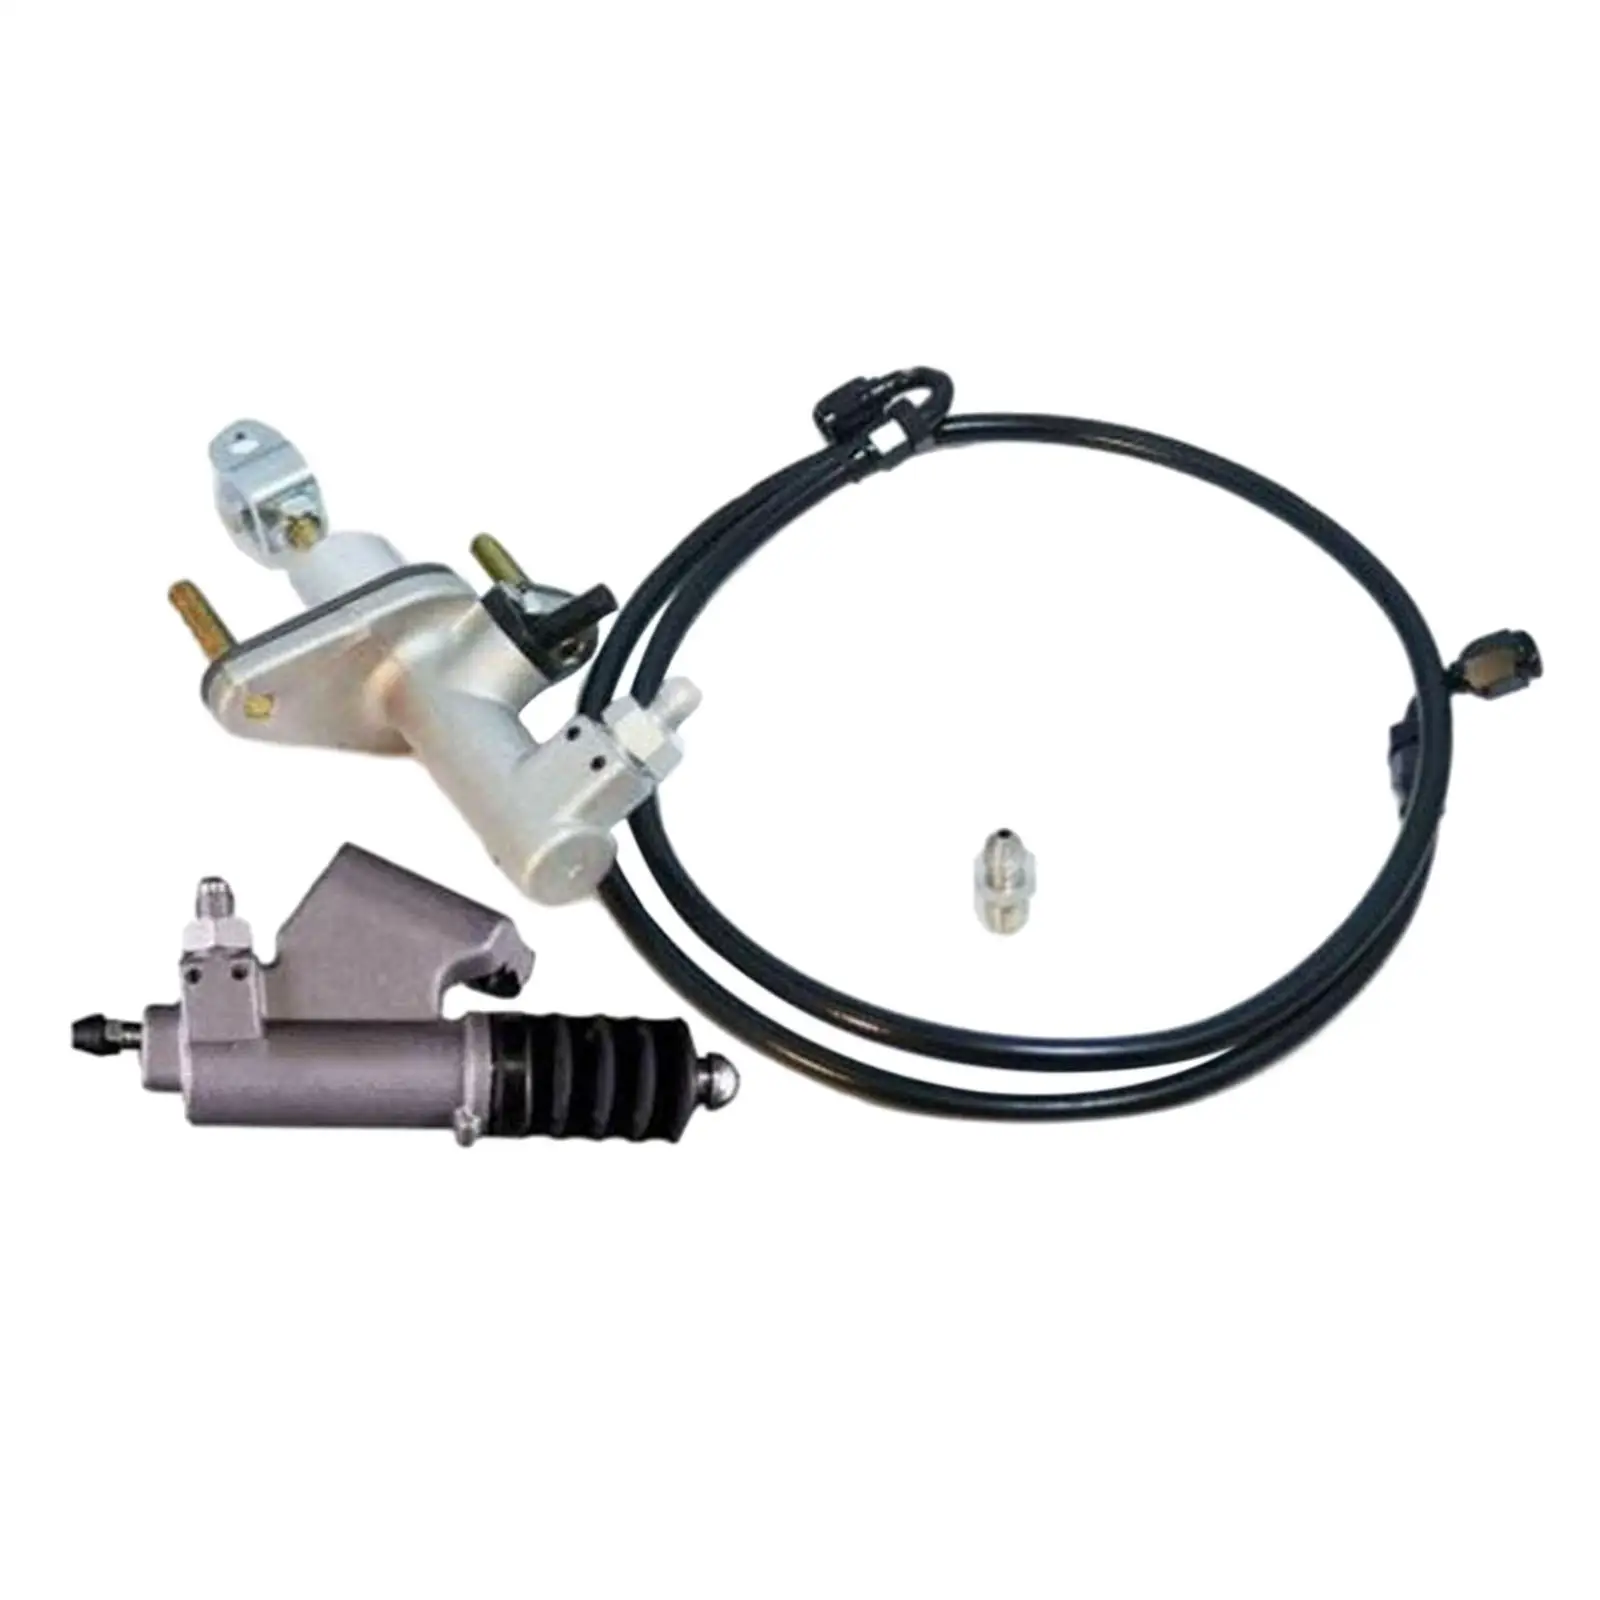 Ktd-clk-kms Clutch Master Cylinder Kit for Acura Direct Replacement